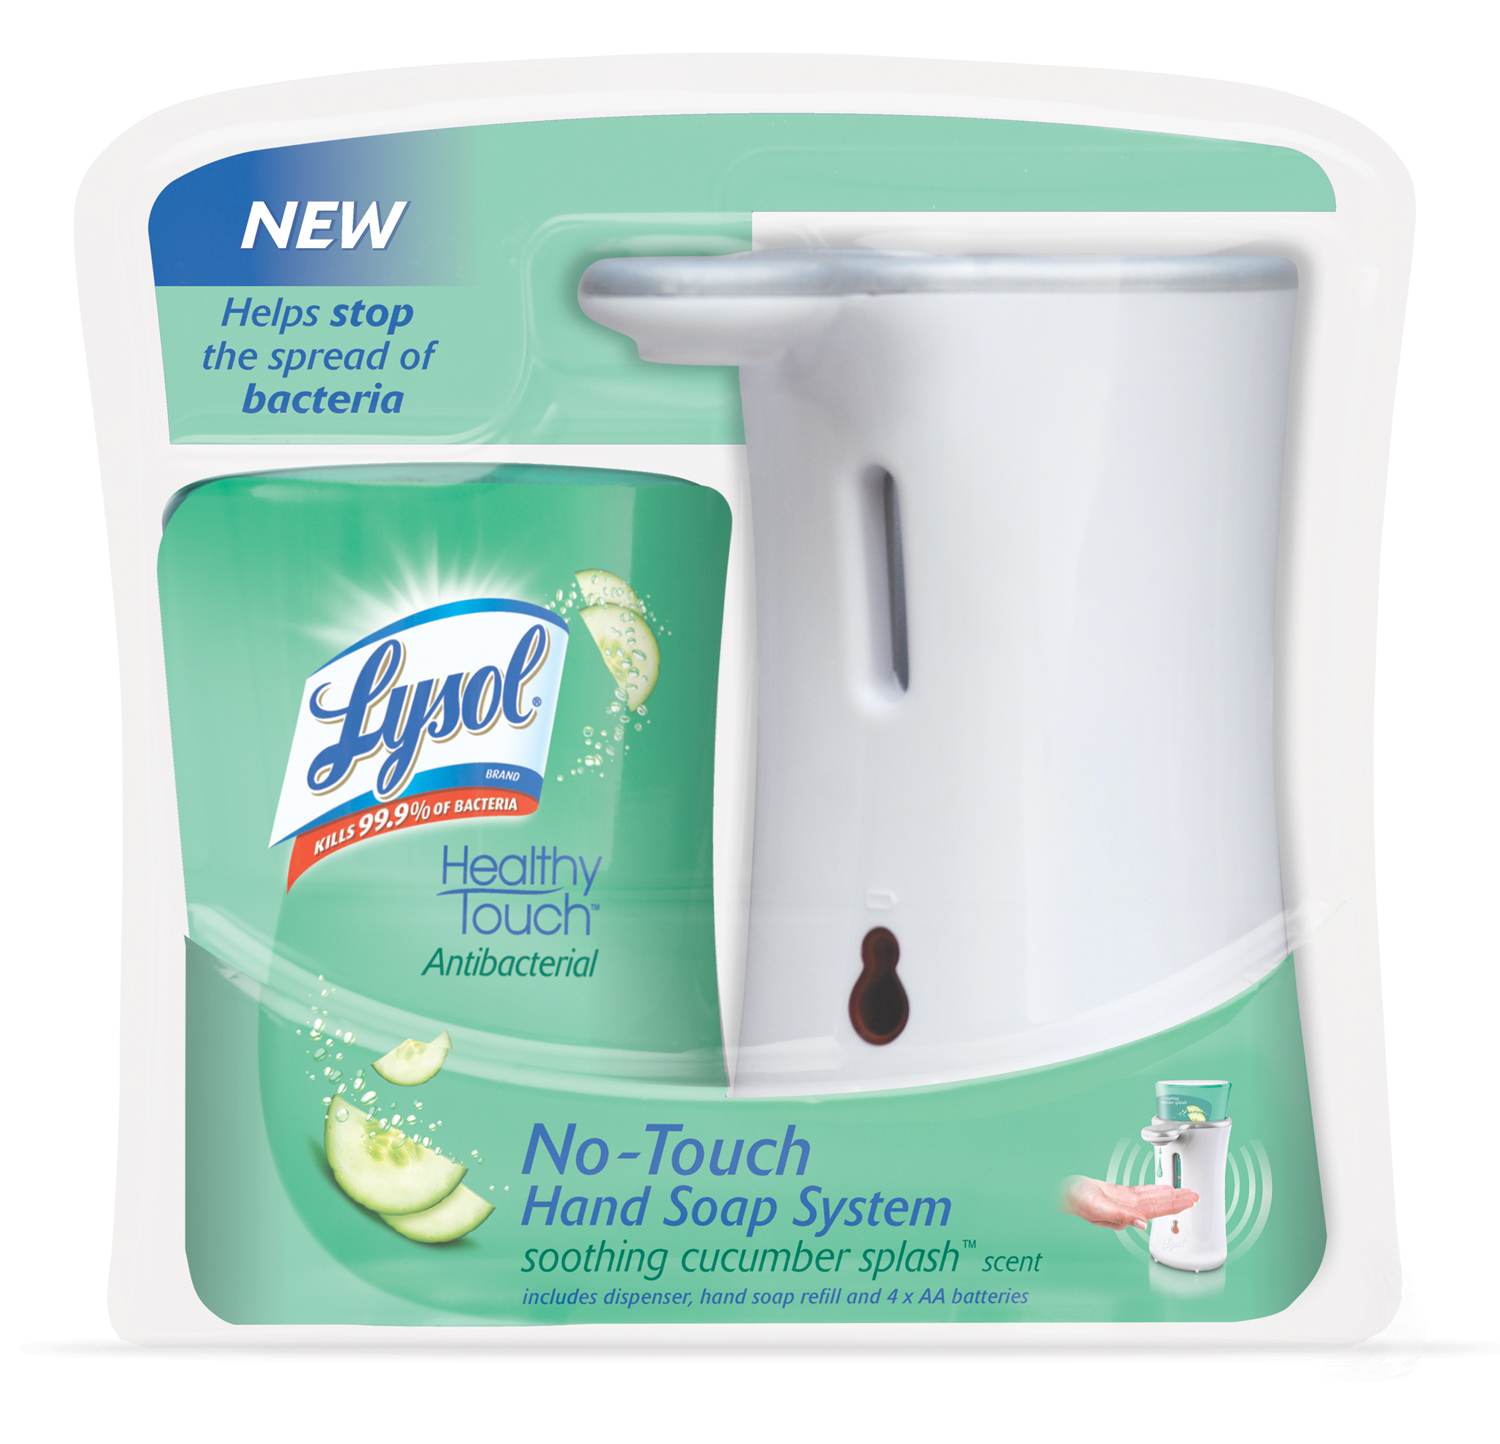 Lysol No-Touch Hand Soap Dispenser Only $0.97 - Lysol Hands Free Soap Dispenser Printable Coupon